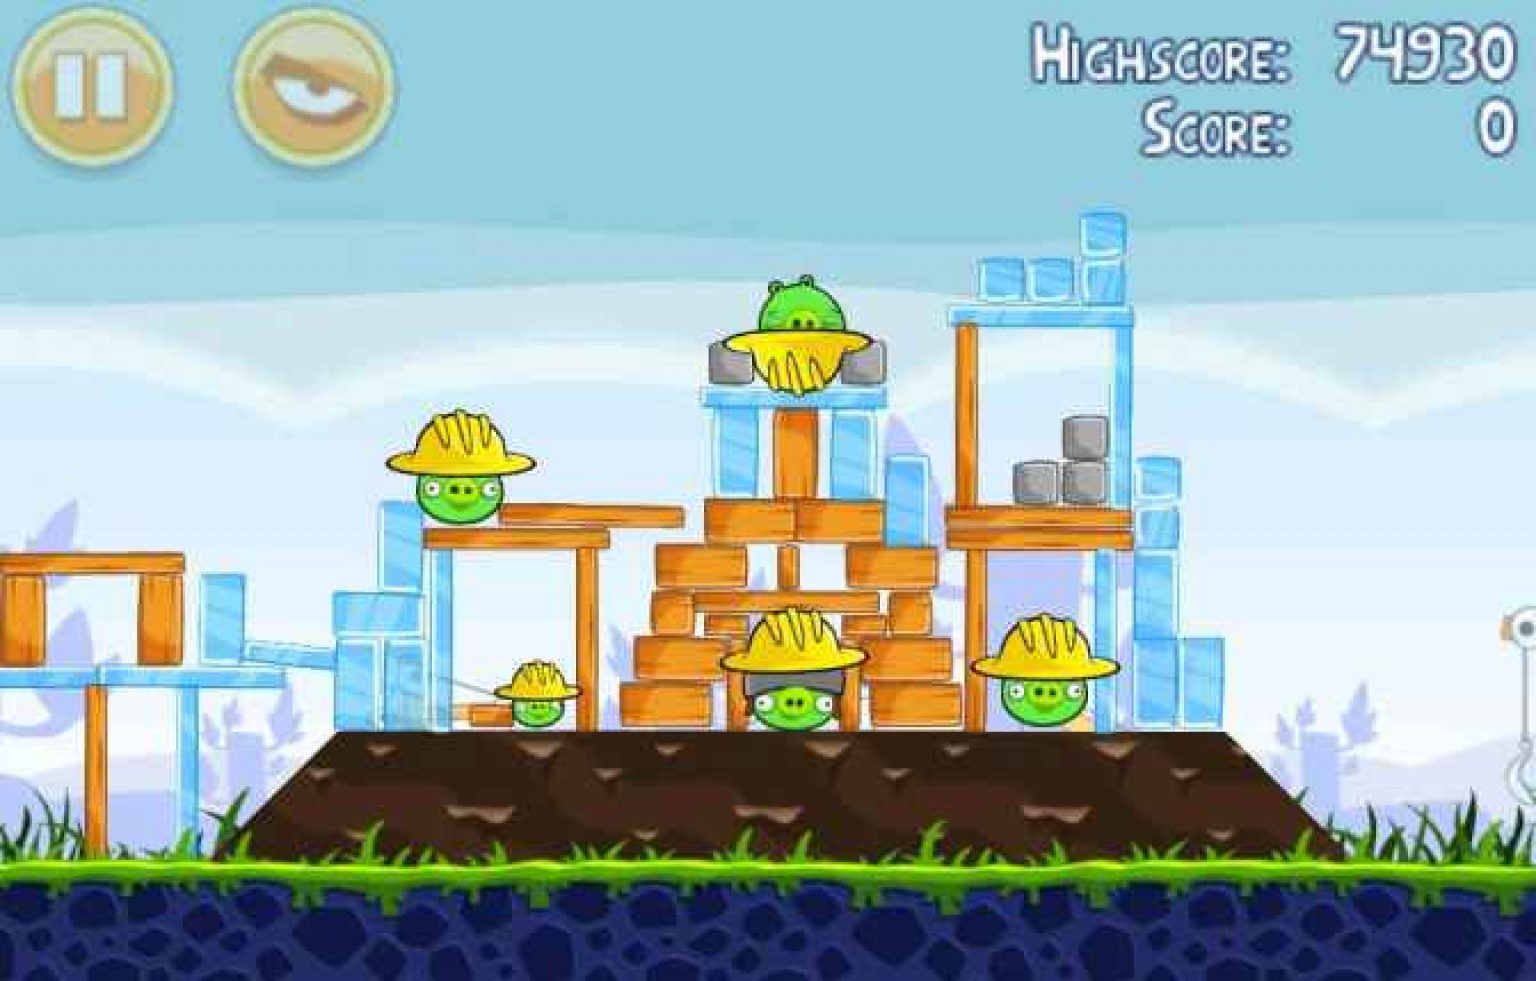 angry birds game free download for pc full version windows 7